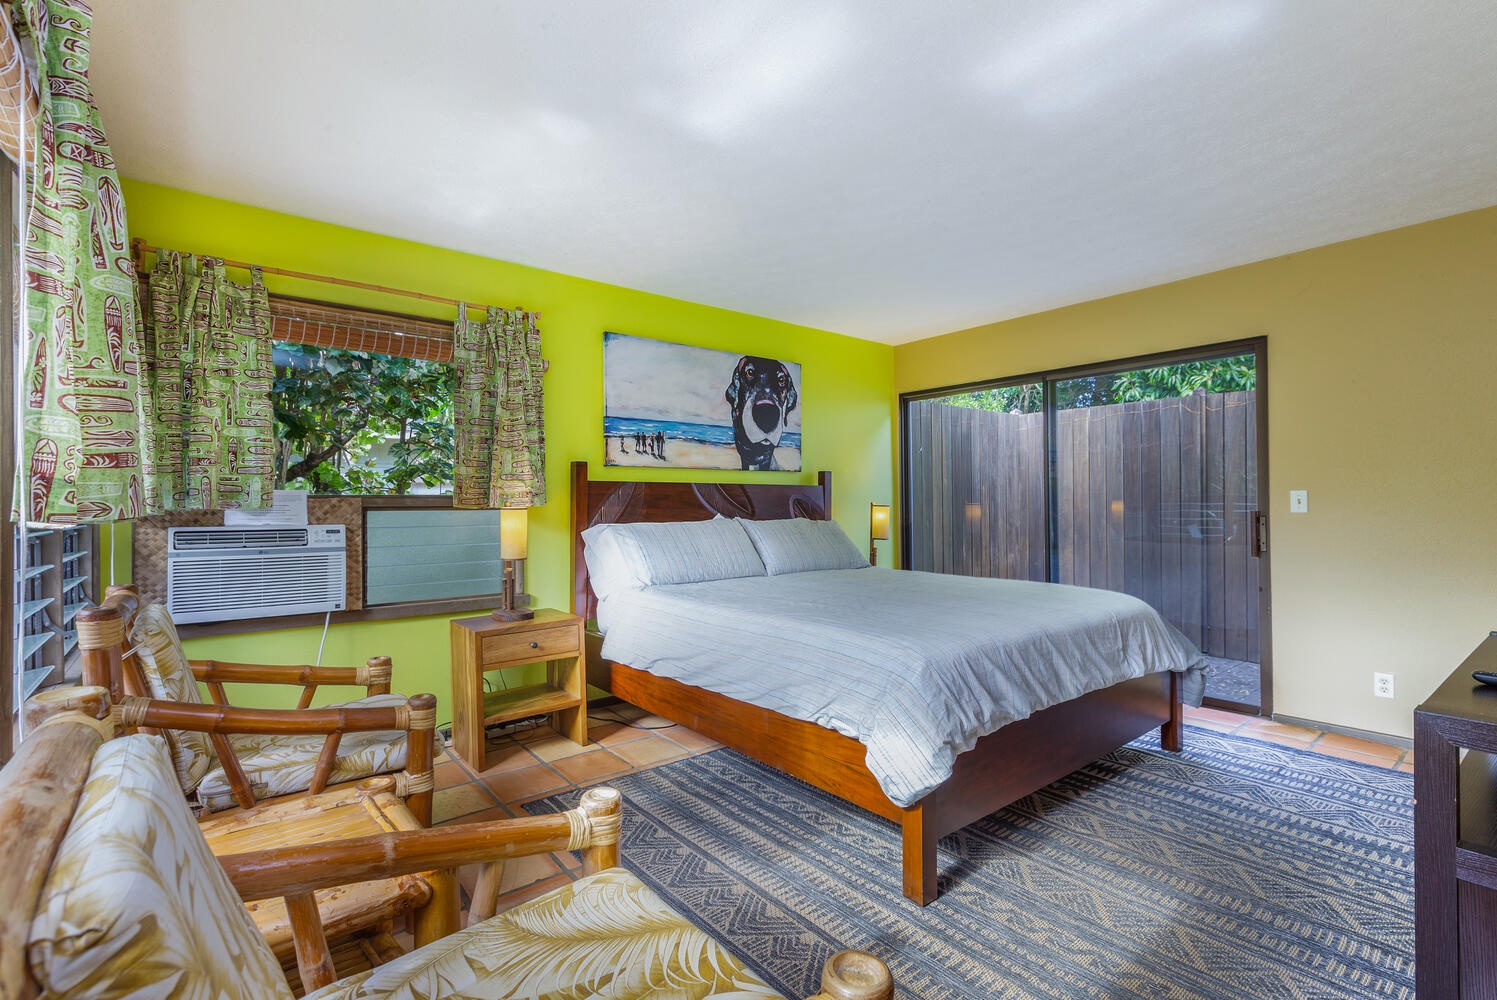 Princeville Vacation Rentals, Ailana Hale - Primary bedroom with king bed